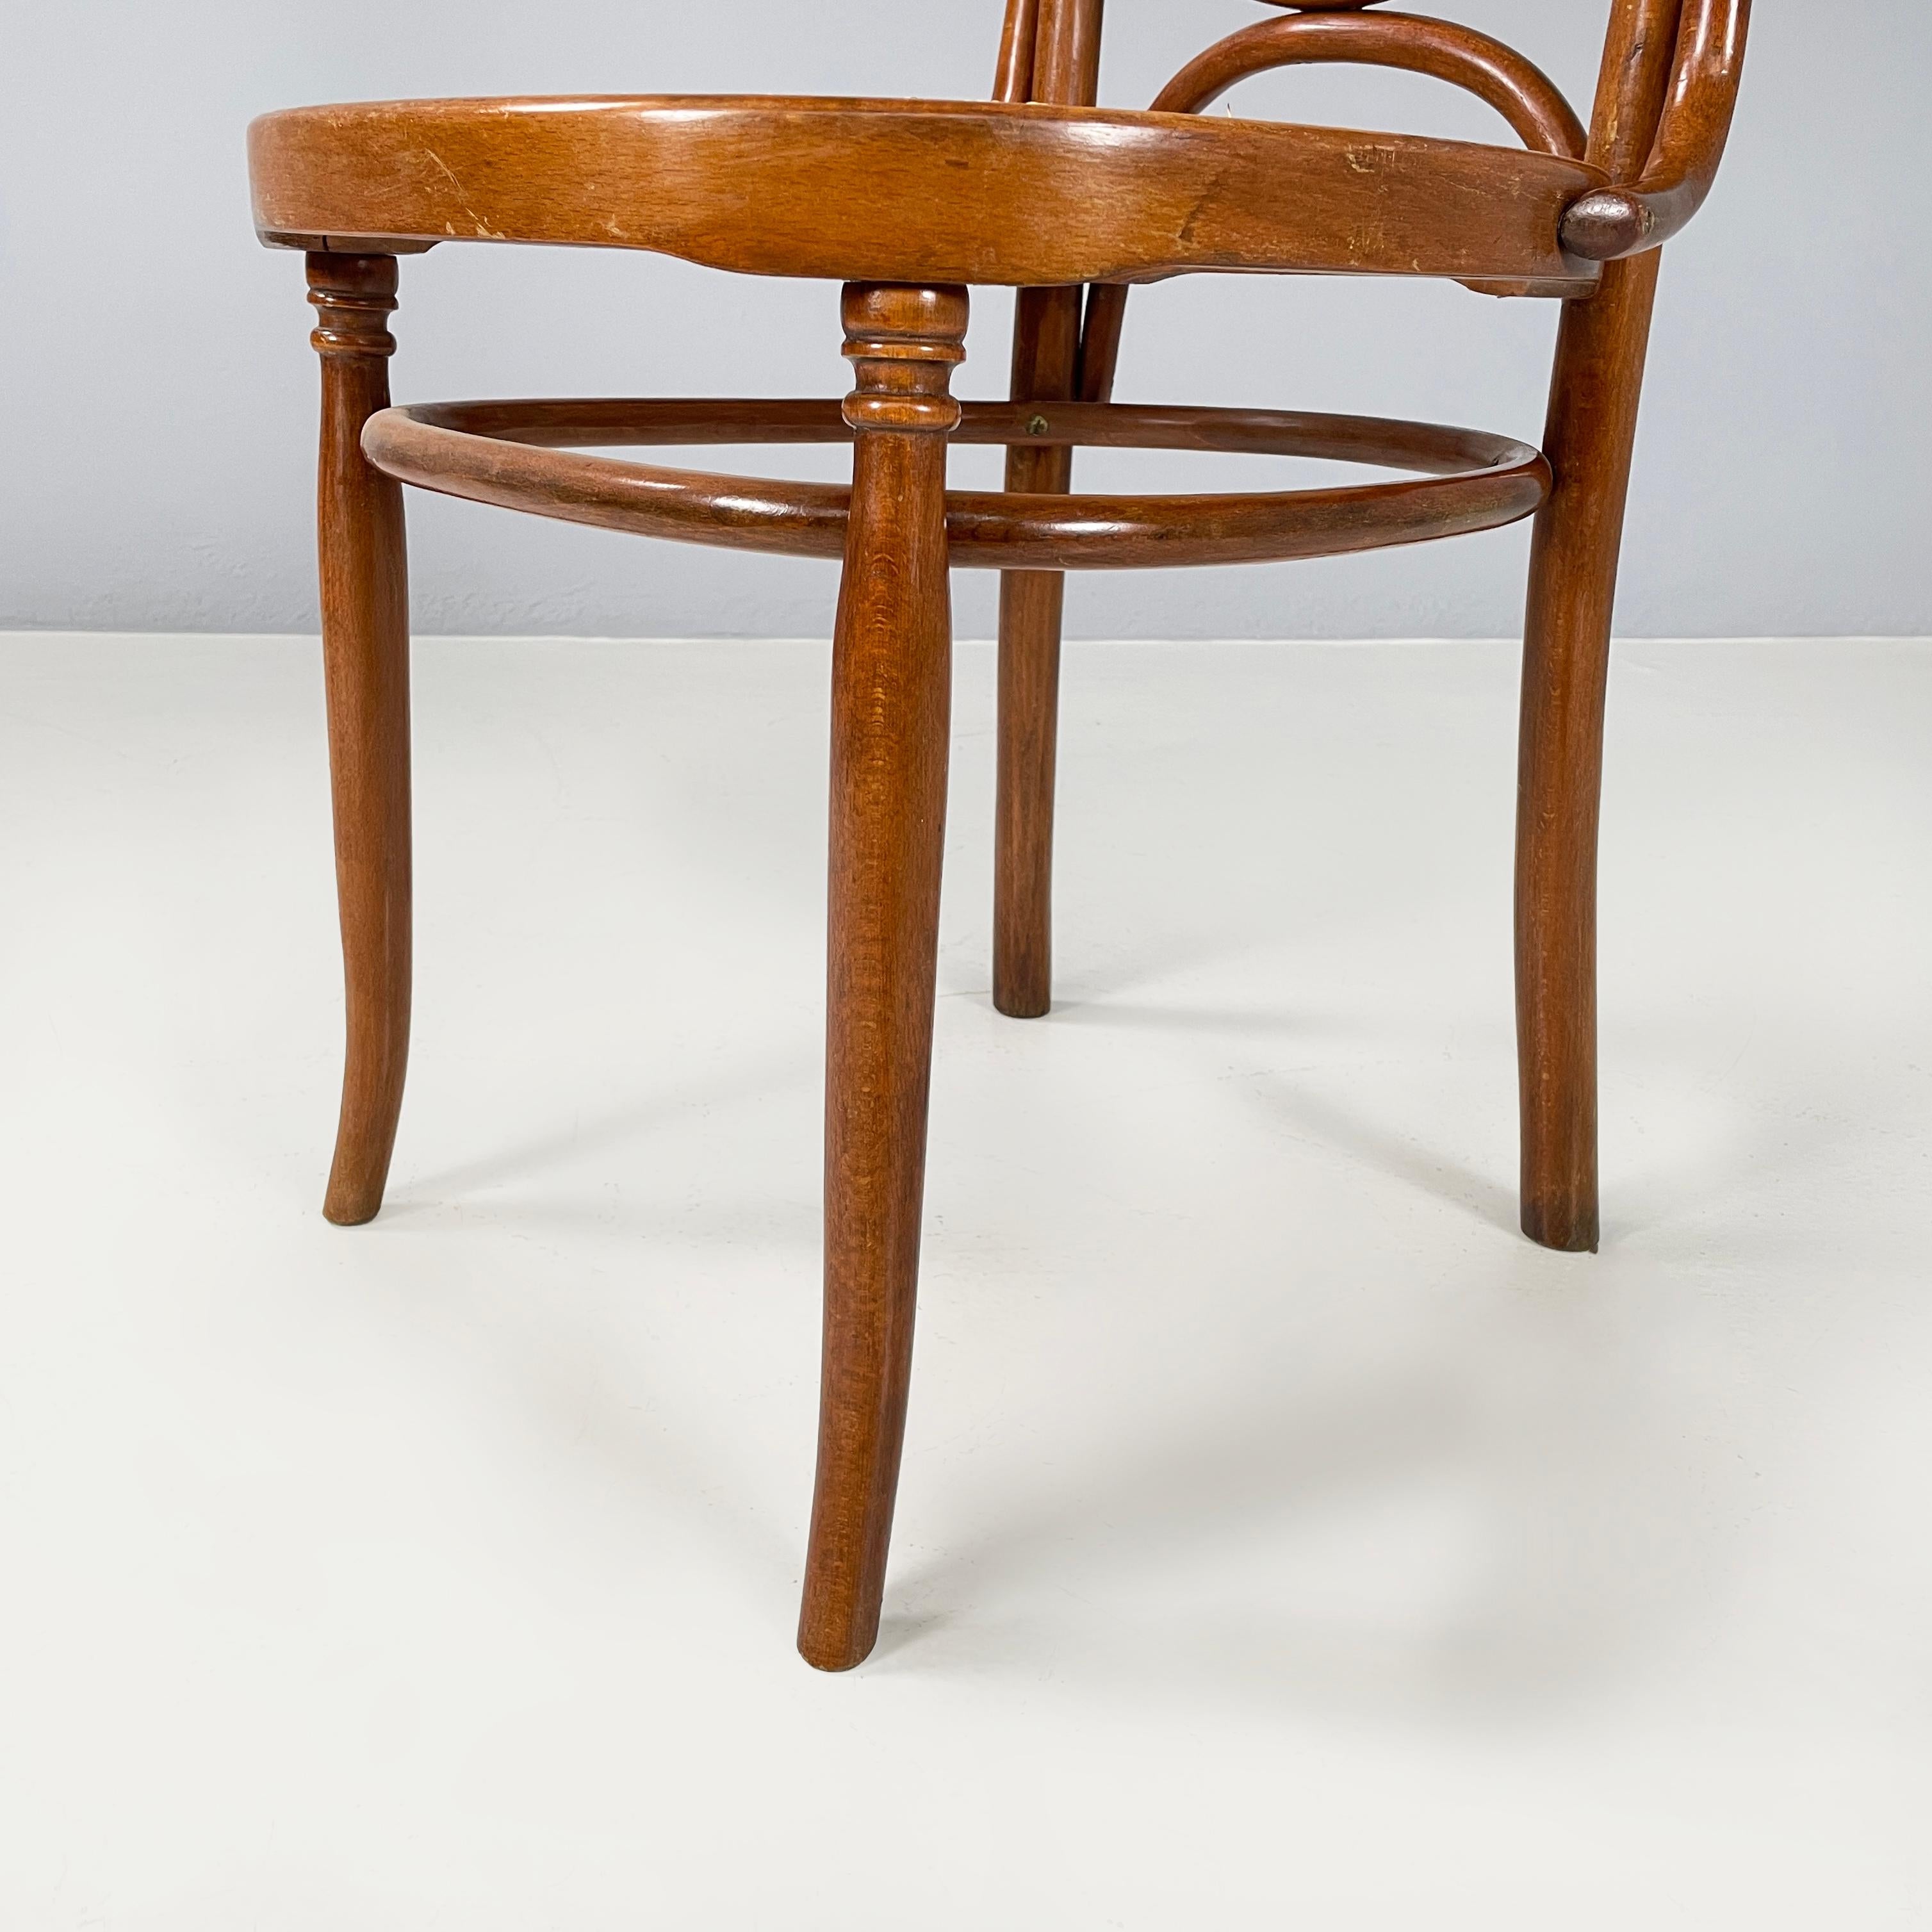 Italian Chair in straw and wood, 1900-1950s For Sale 12